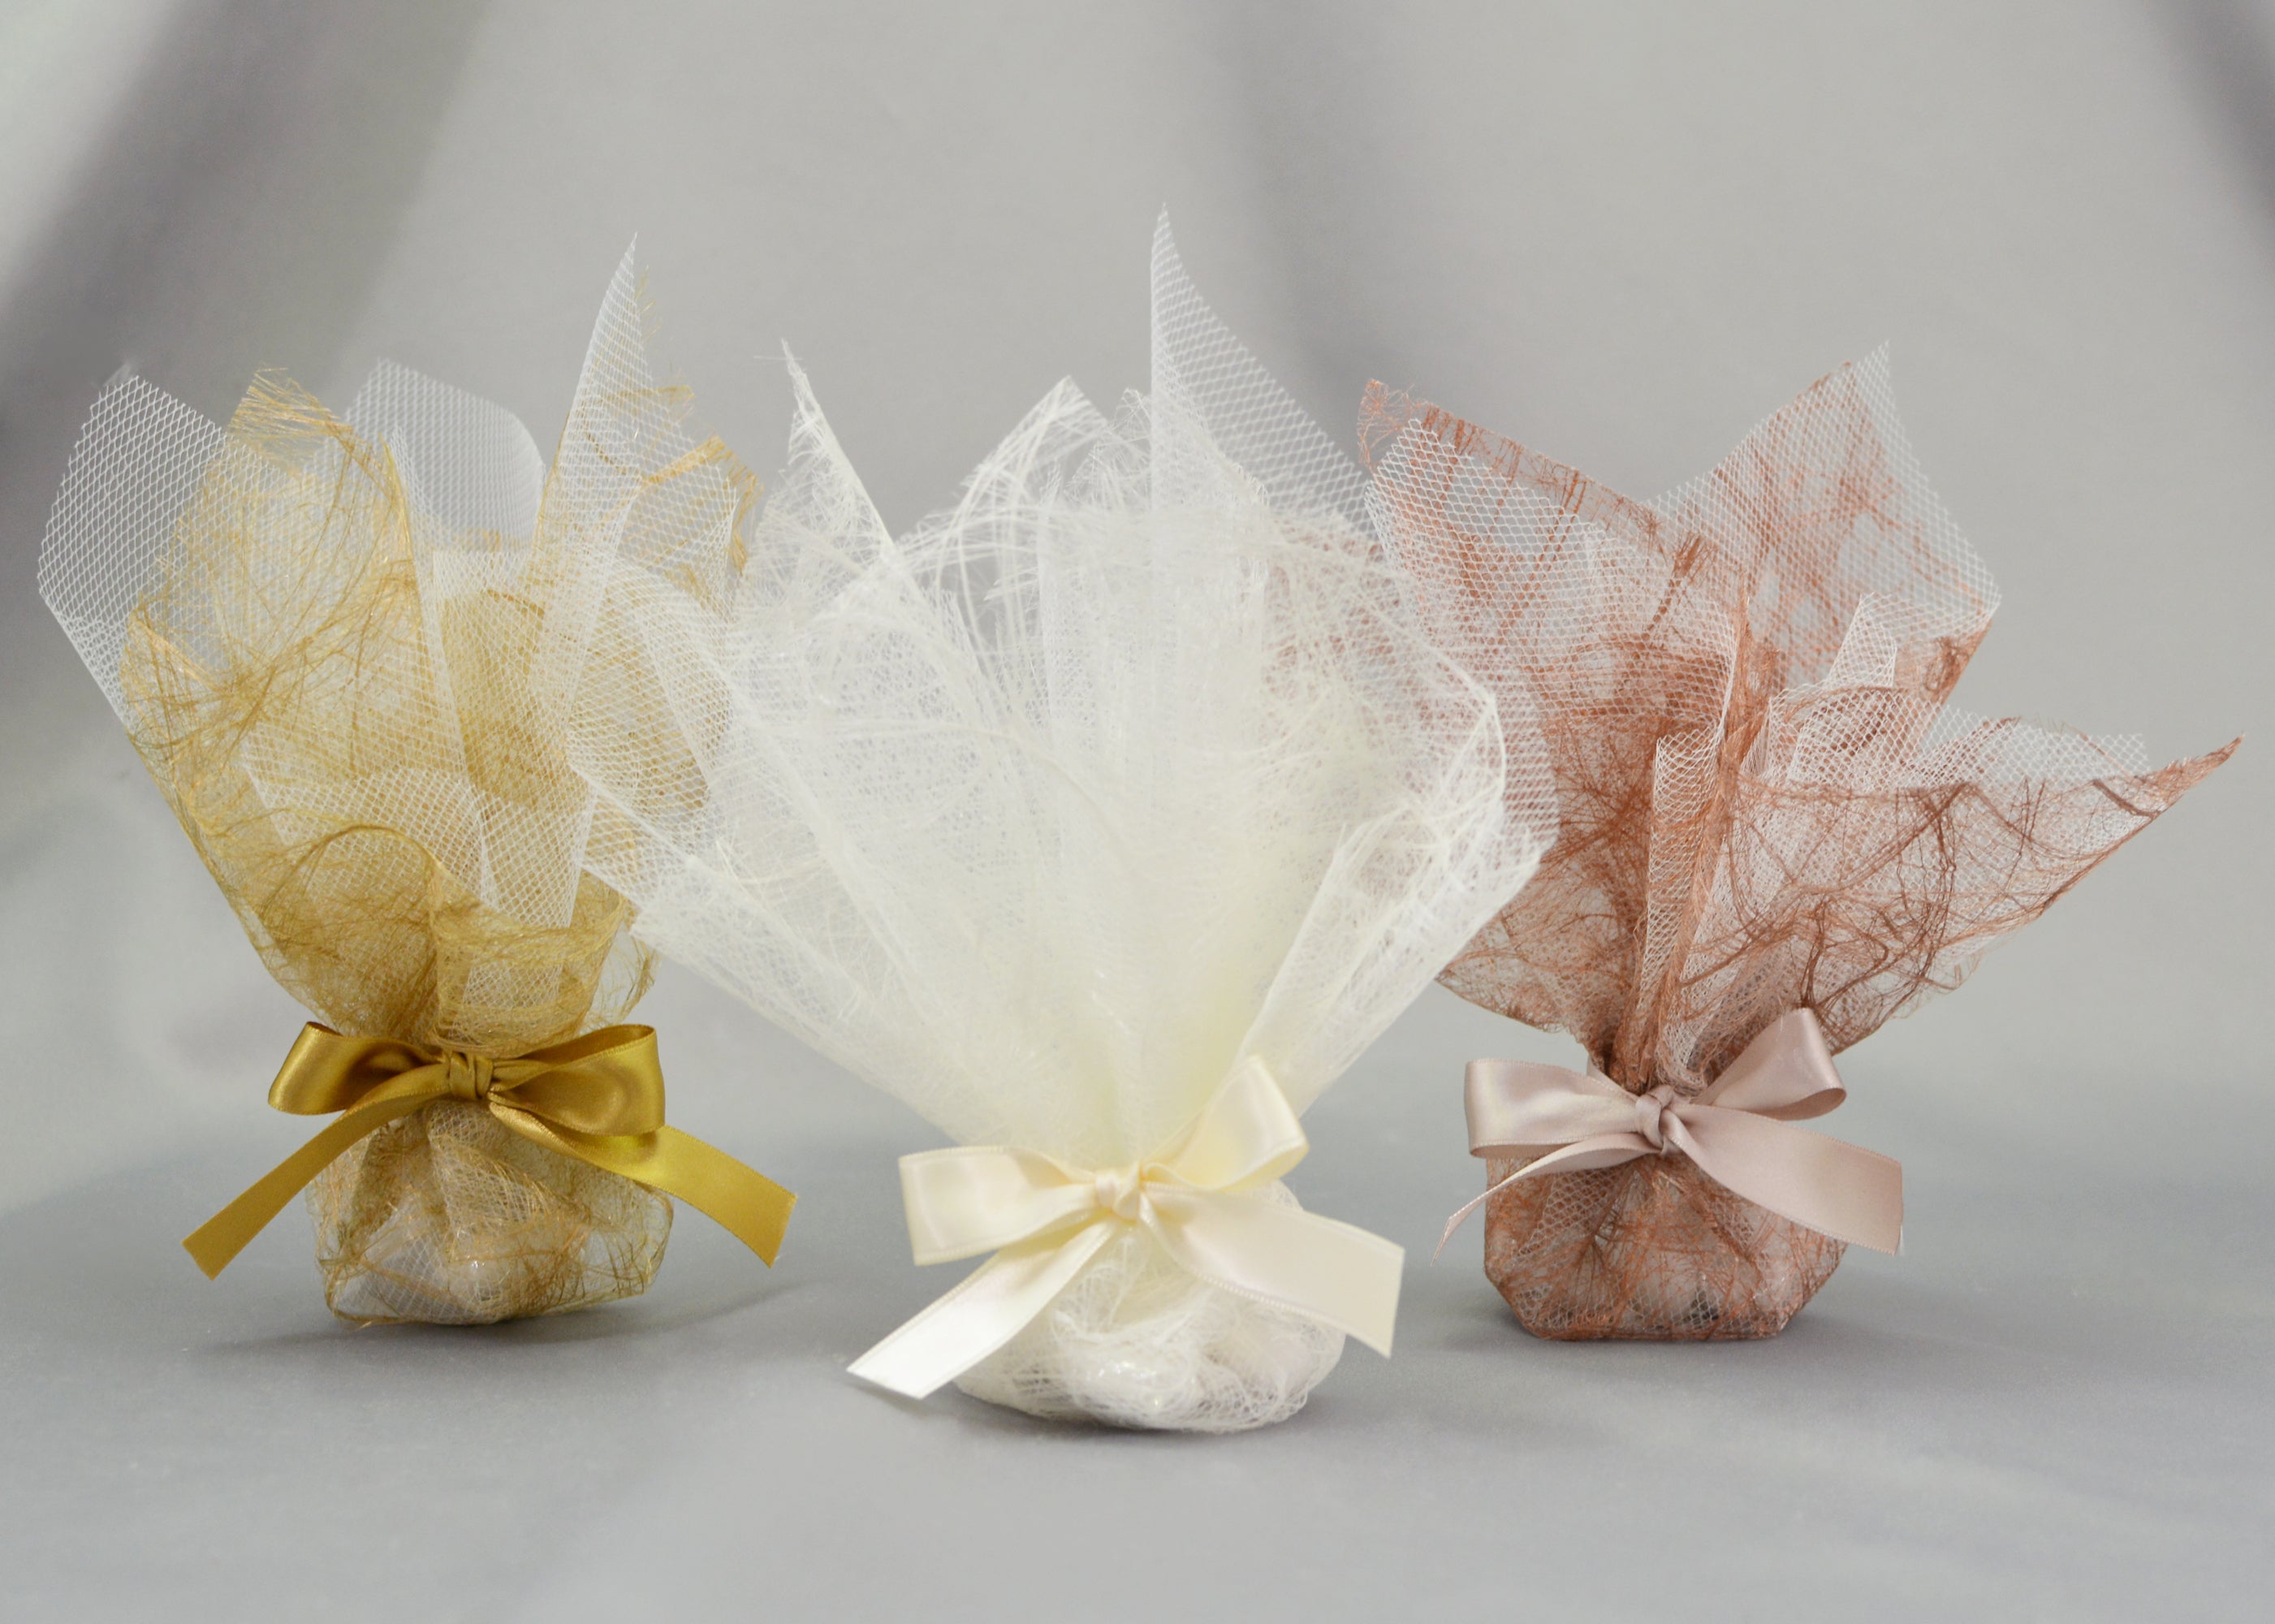 Leaf Branch Solid Satin Ribbon for Bows Gift Wrapping - 1 - 3